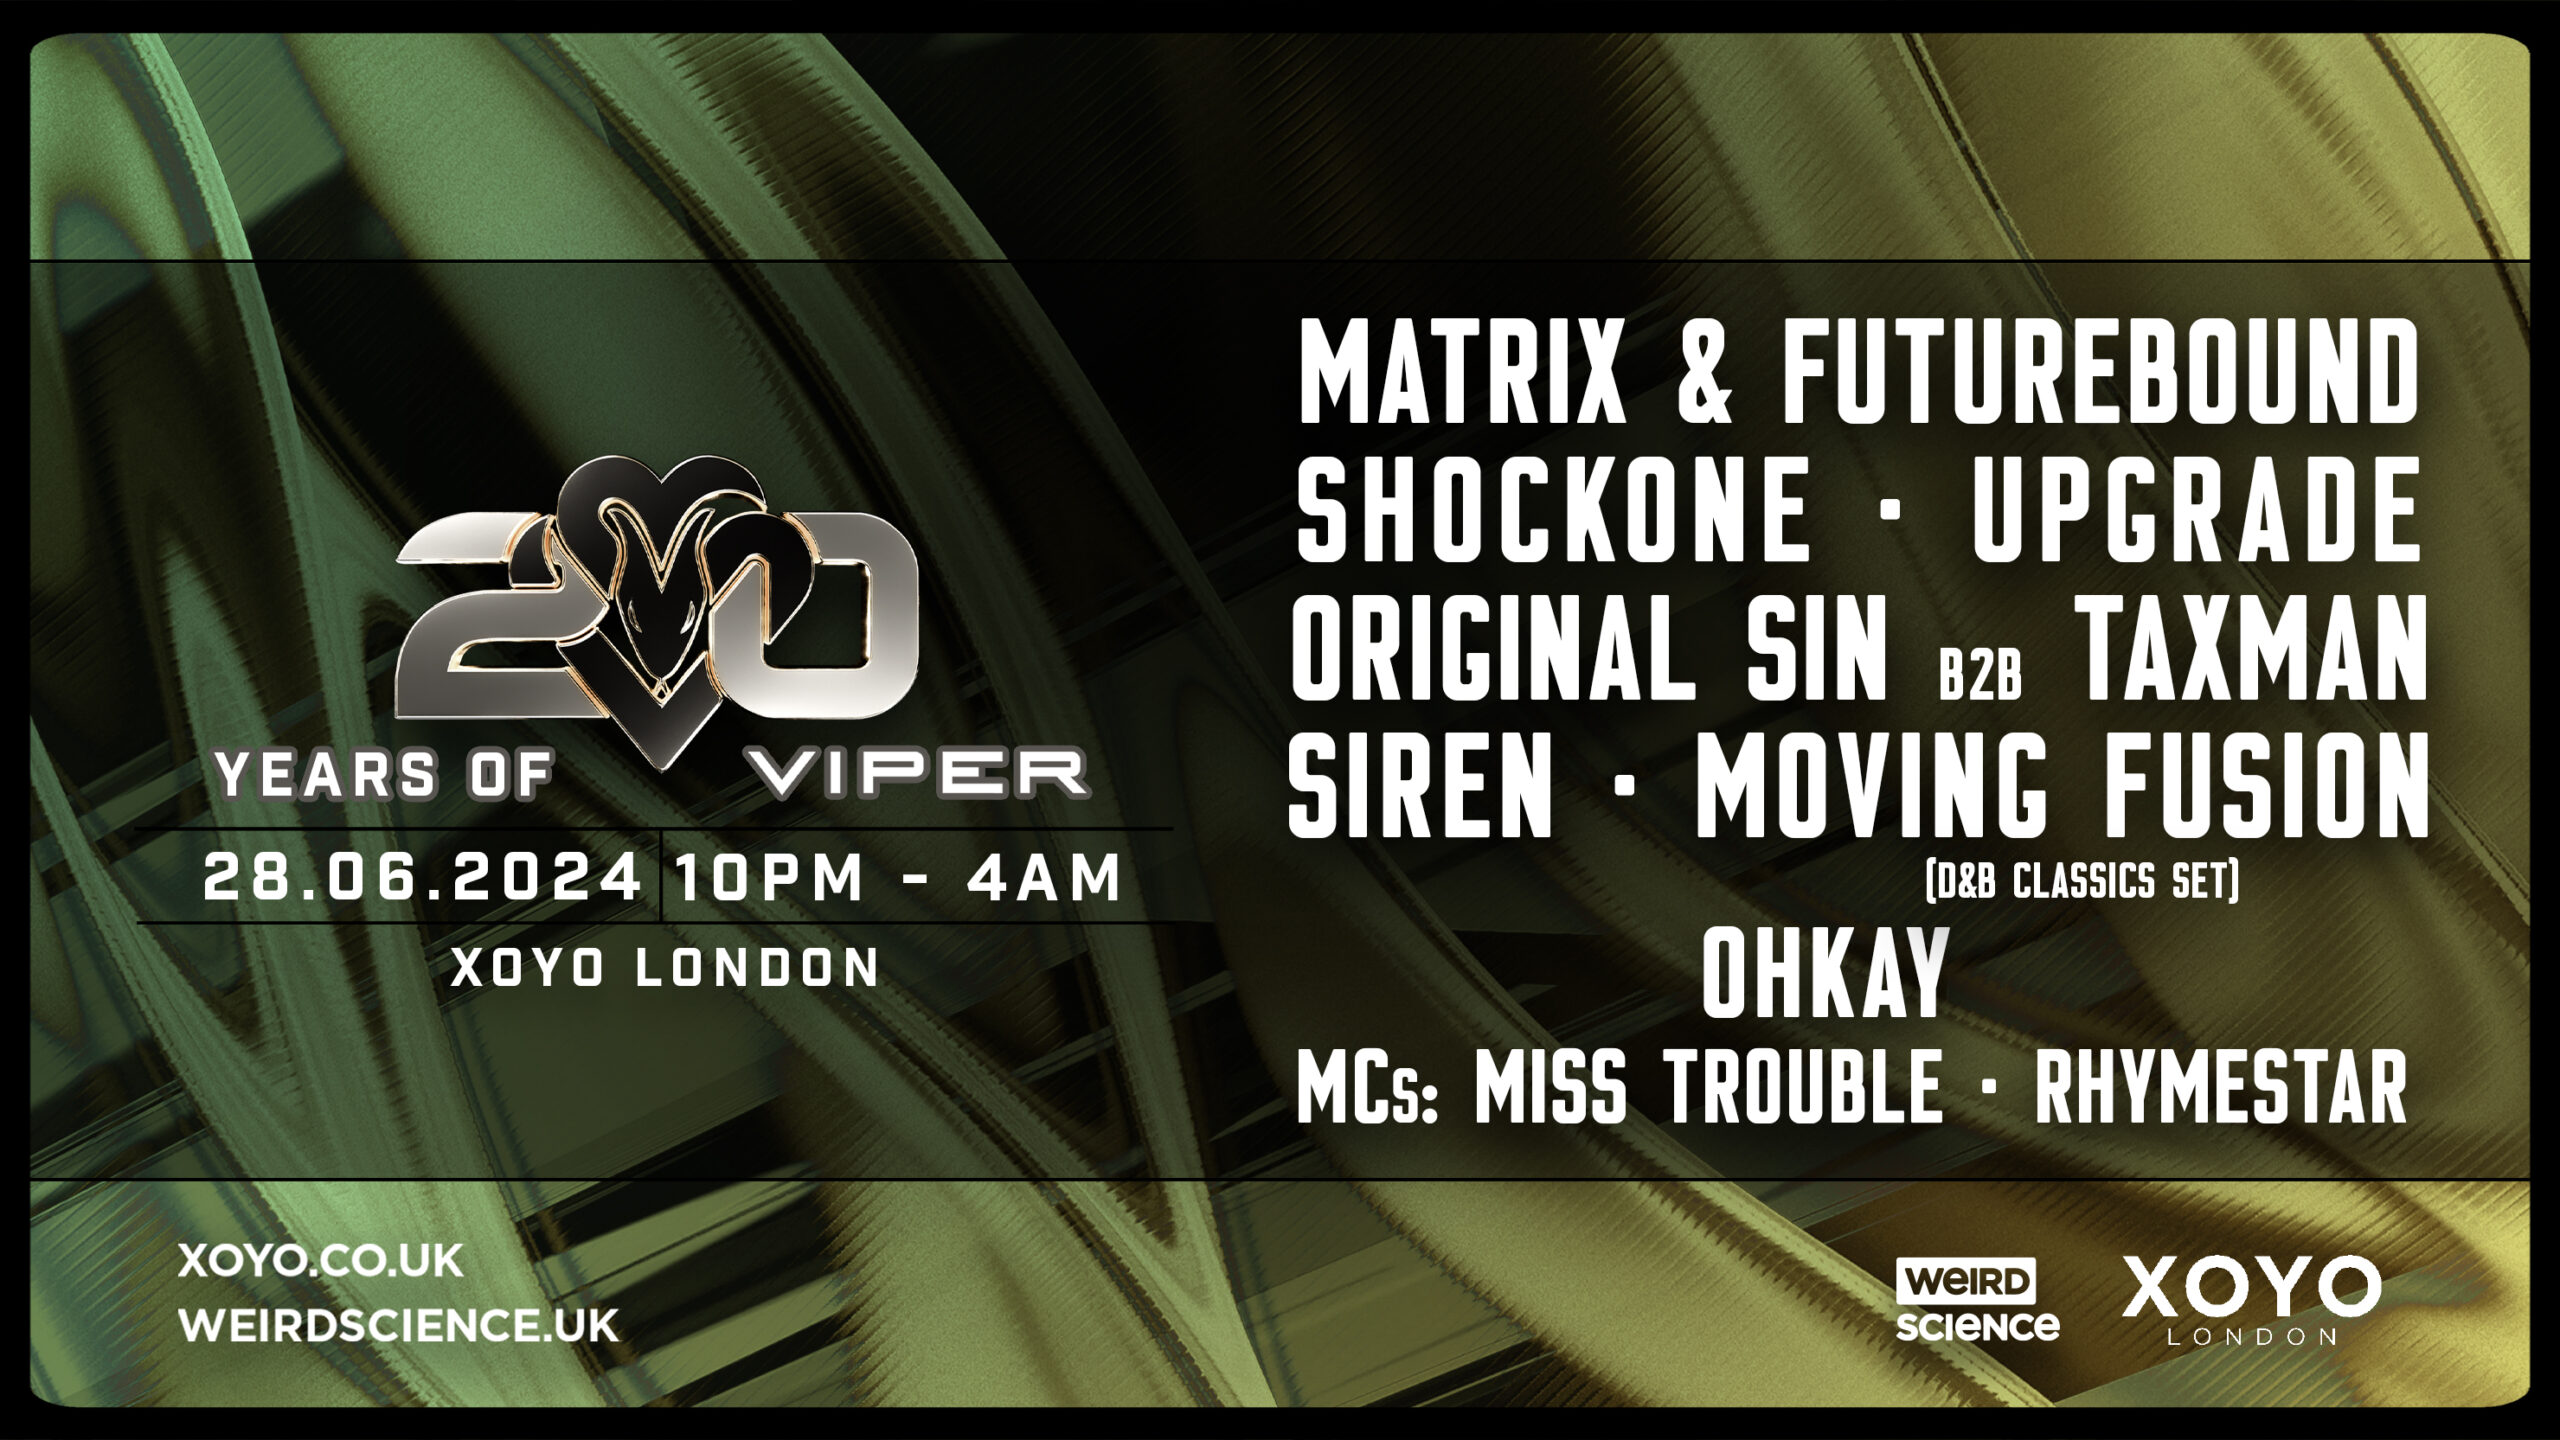 20 Years of Viper at XOYO London on Friday 28th June.